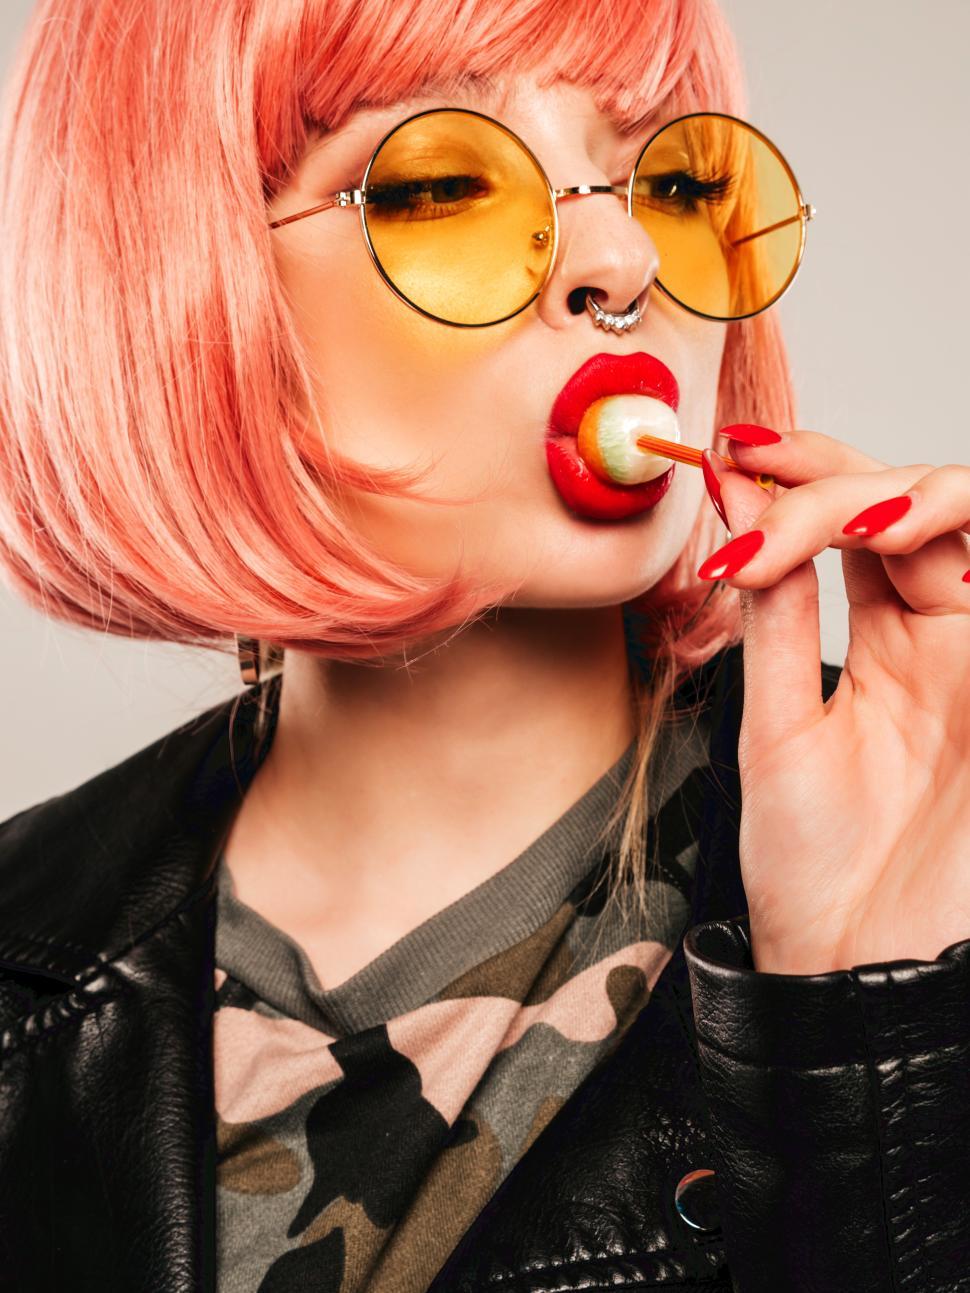 Free Image of A woman with pink hair and yellow sunglasses eating a lollipop 